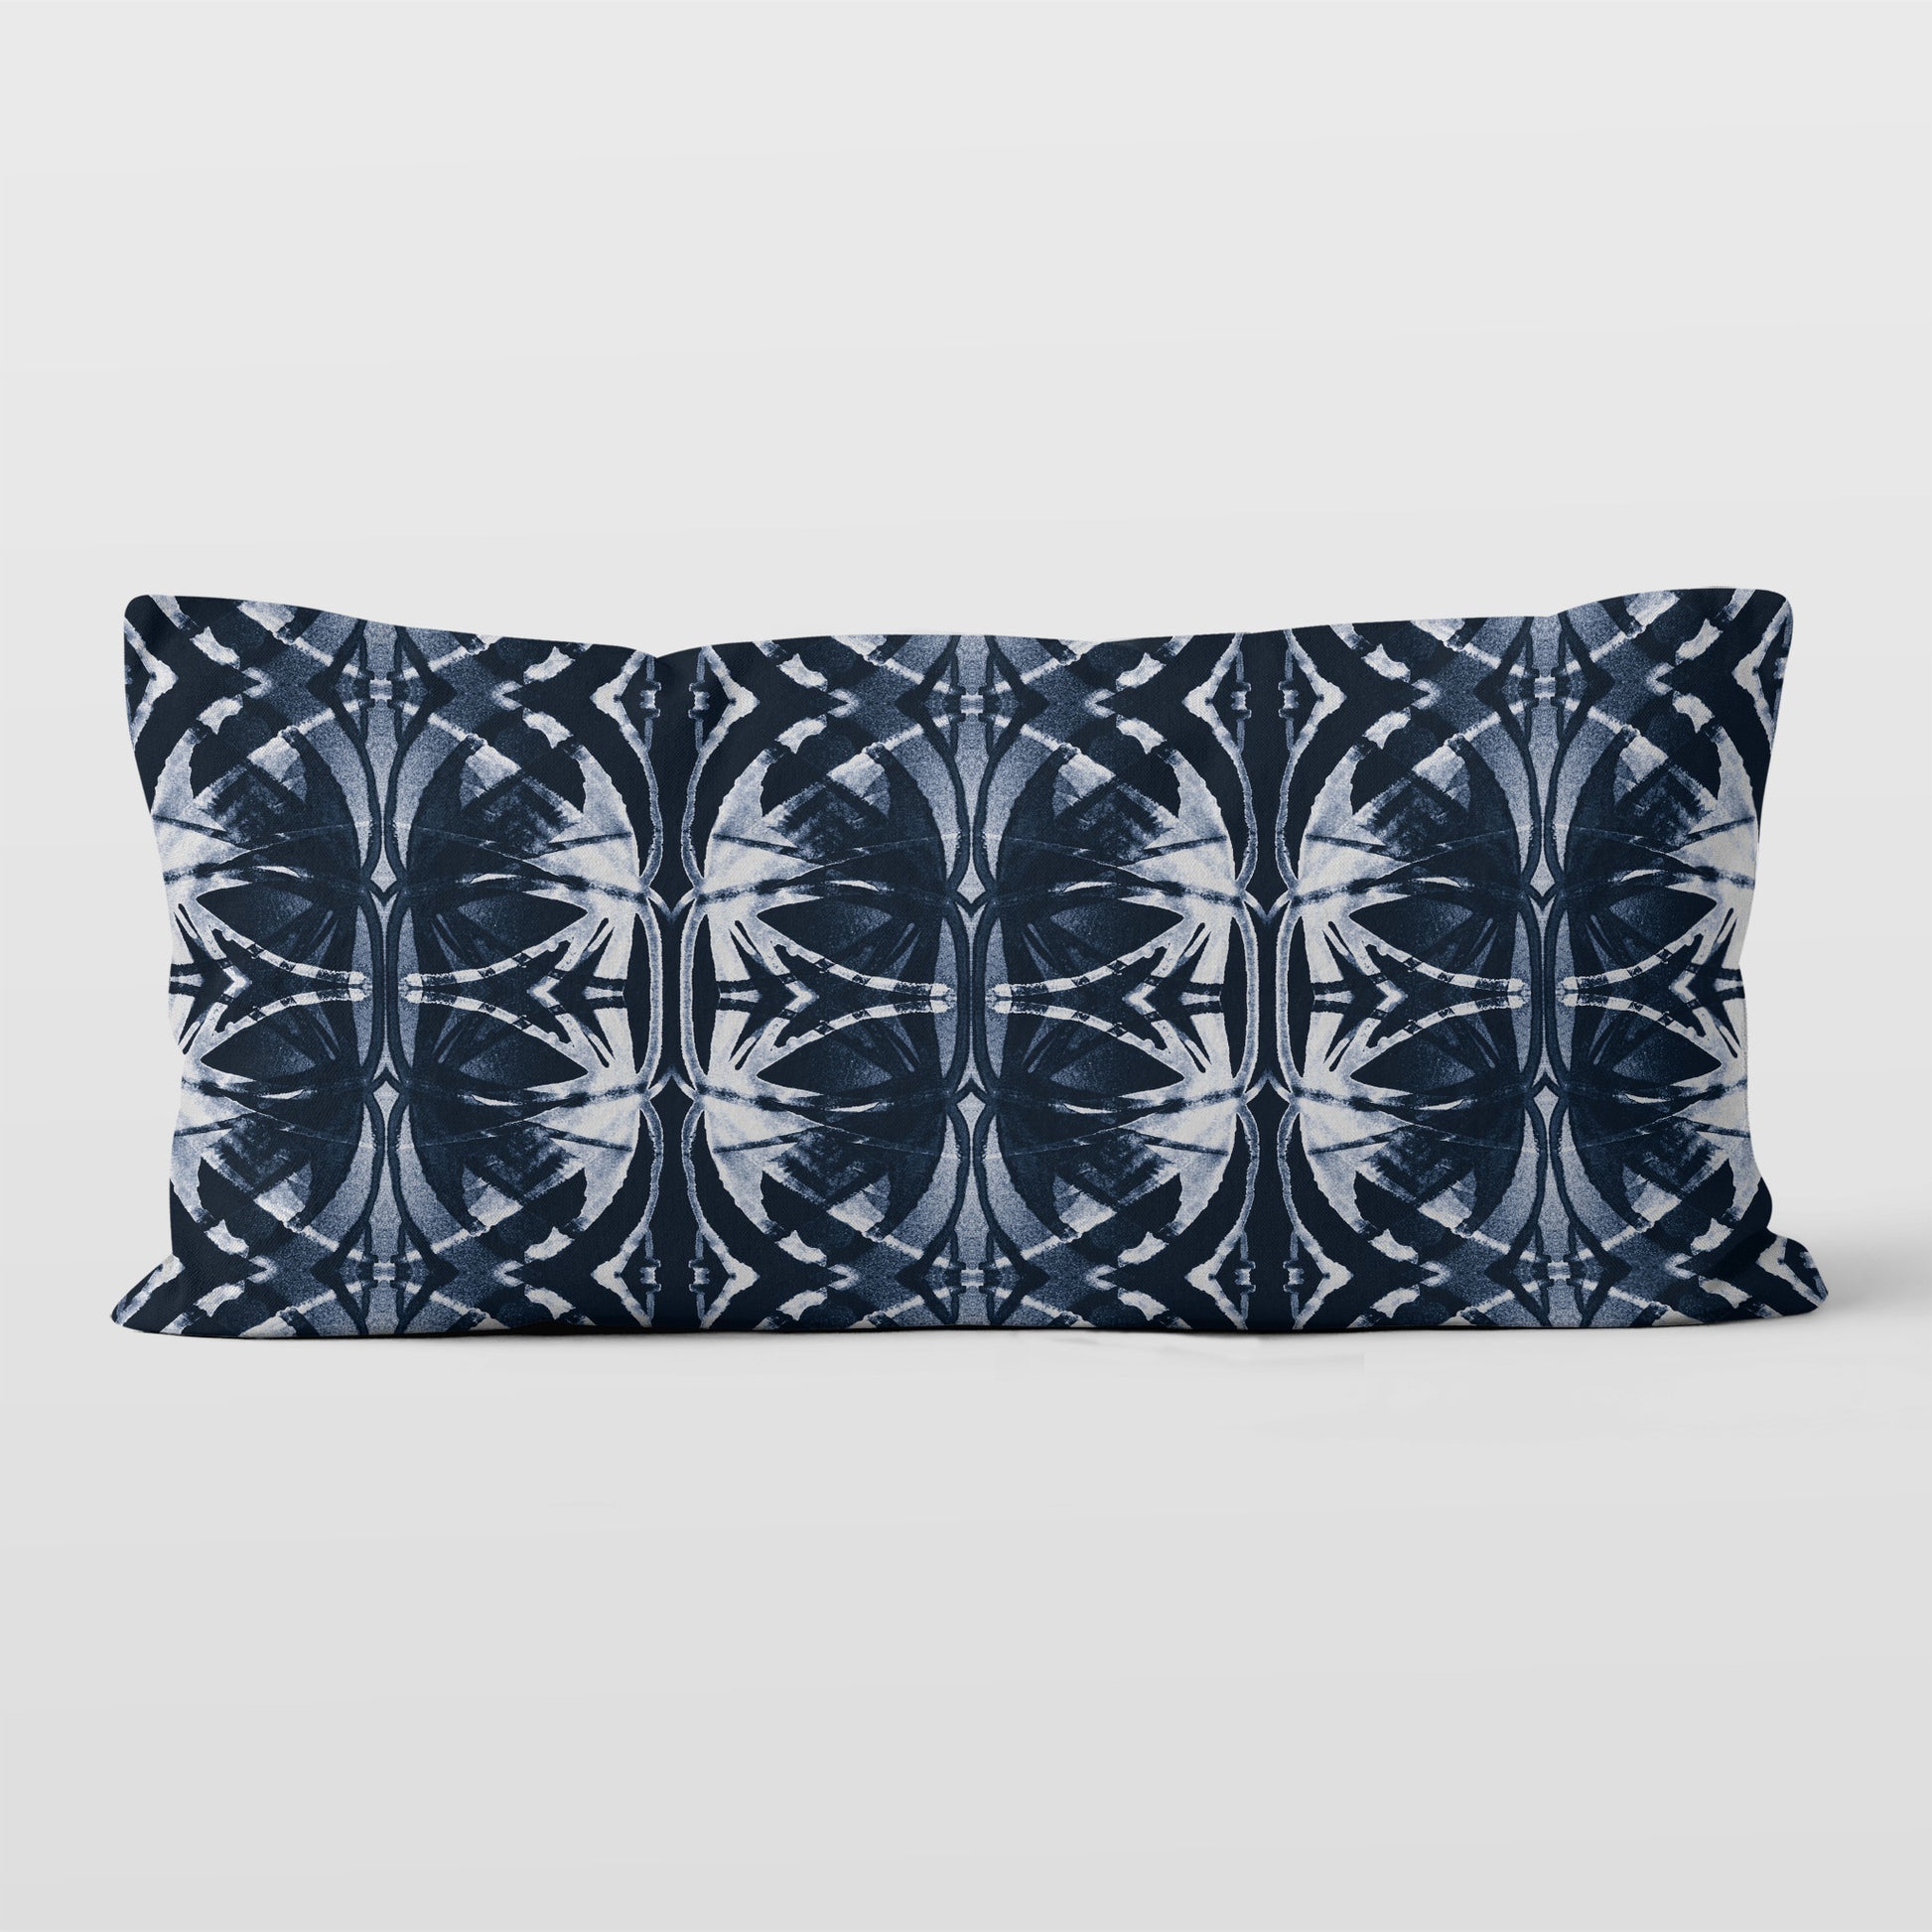 Rectangular pillow featuring abstract pattern in dark blue and white.